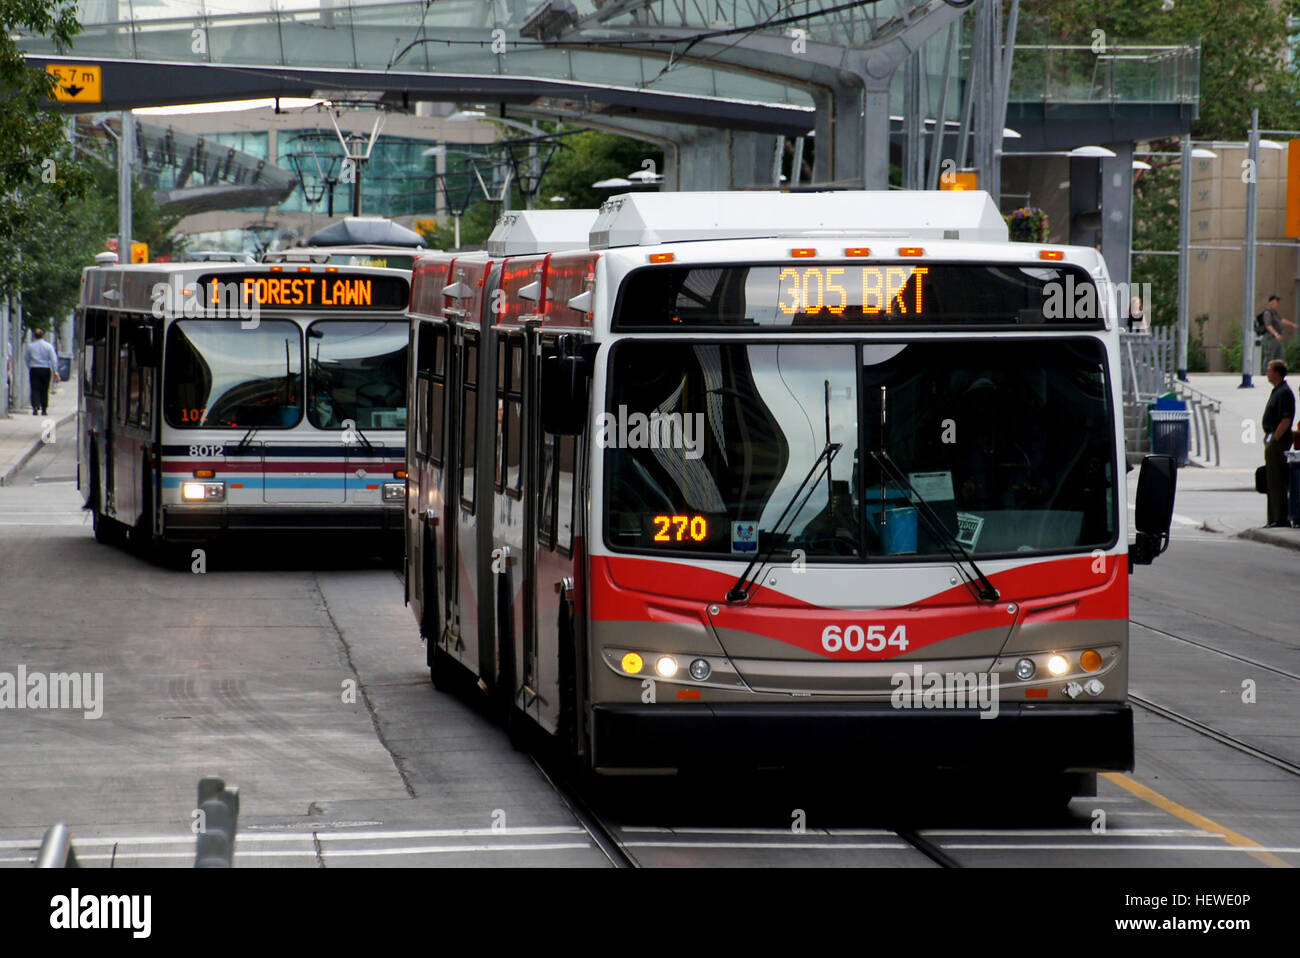 BRT is a distinctive, frequent, and limited stop bus service, similar to LRT, (the CTrain). BRT is being introduced in advance of future LRT lines. BRT will operate on regular roads with transit priority at traffic signals and other enhanced service features such as improved passenger waiting areas and larger shelters at some stops. Eventually, Calgary Transit will operate larger capacity, articulated buses on BRT routes. Stock Photo